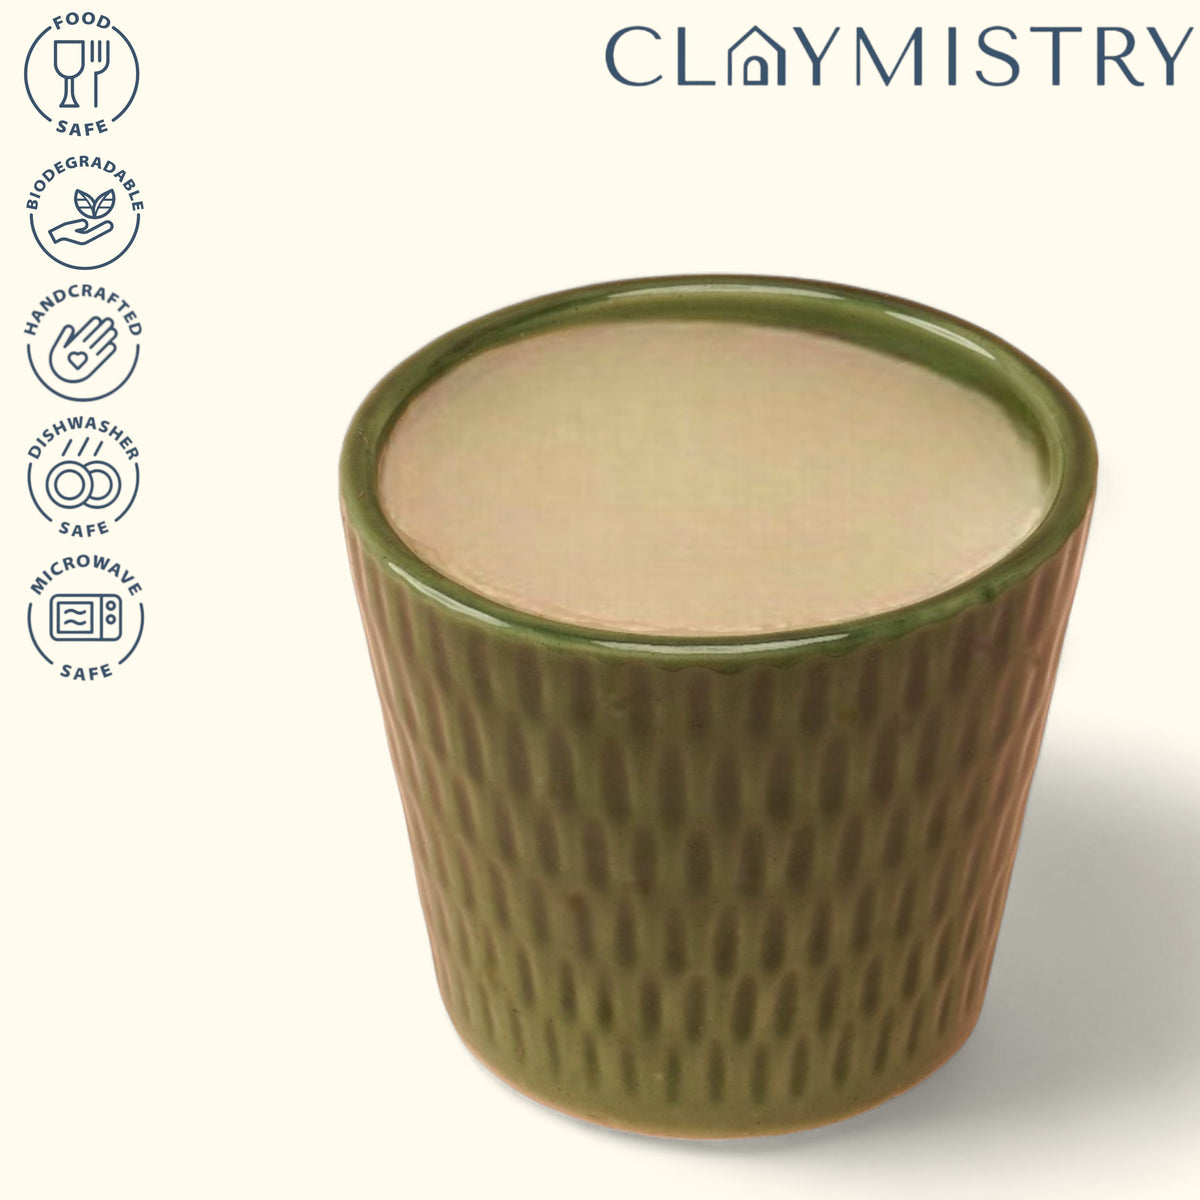 Claymistry Ceramic Textured Design Pot for Indoor Plants, Set of 1 | 11cm * 11cm * 13cm | Glossy Finish | Home, Indoor Decor & Gifting |Planters for Garden, Balcony, Living Room Decoration